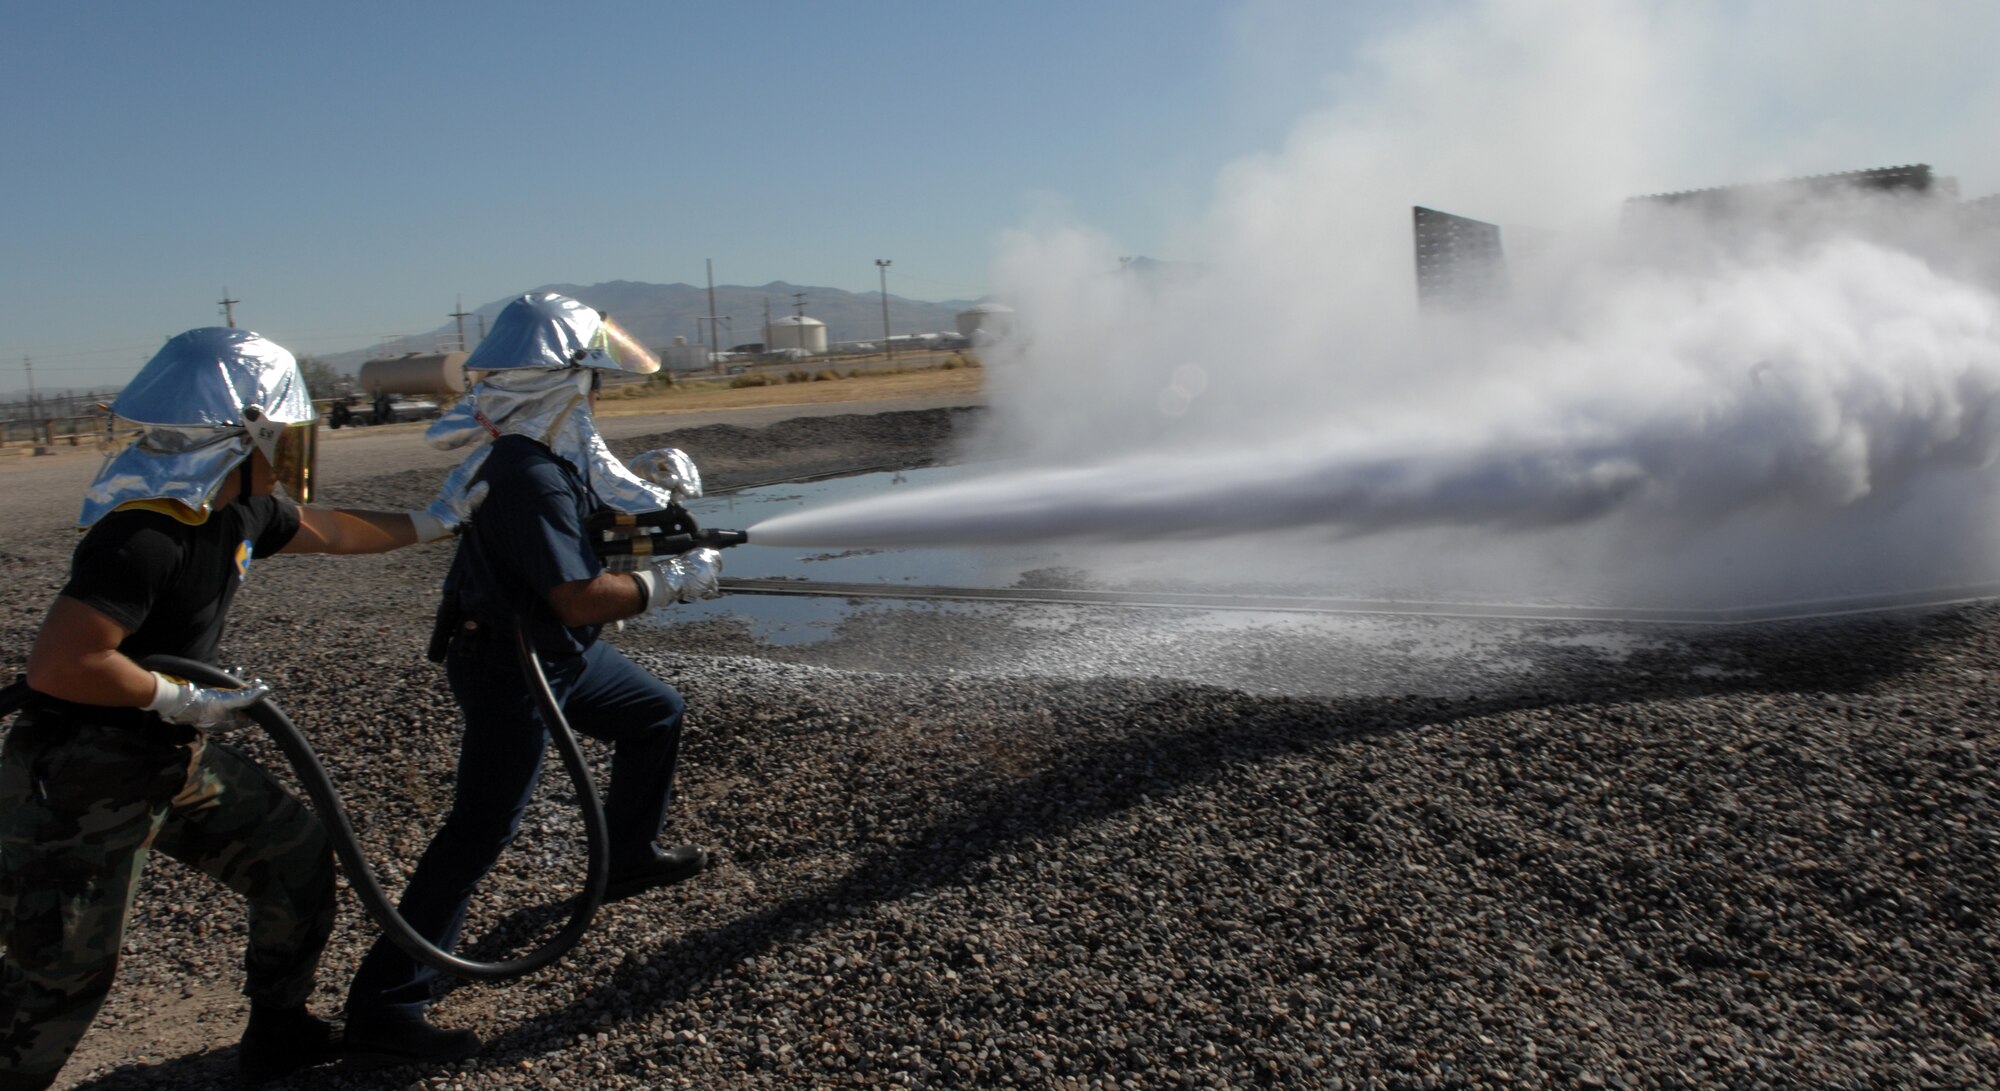 Davis-Monthan Air Force Fire Fighters, assigned to the 355th Civil Engineer Squadron, participate in a live-fire exercise, Oct. 21, using the P-19 Fire Fighting Truck, which uses technology that reduces the amount of water and foam needed to extinguish a fire. Currently only a number of P-19 are in uses in the Air Force, but the Air Force plans to purchase more P-19 Fire Fighting trucks in the future. 
